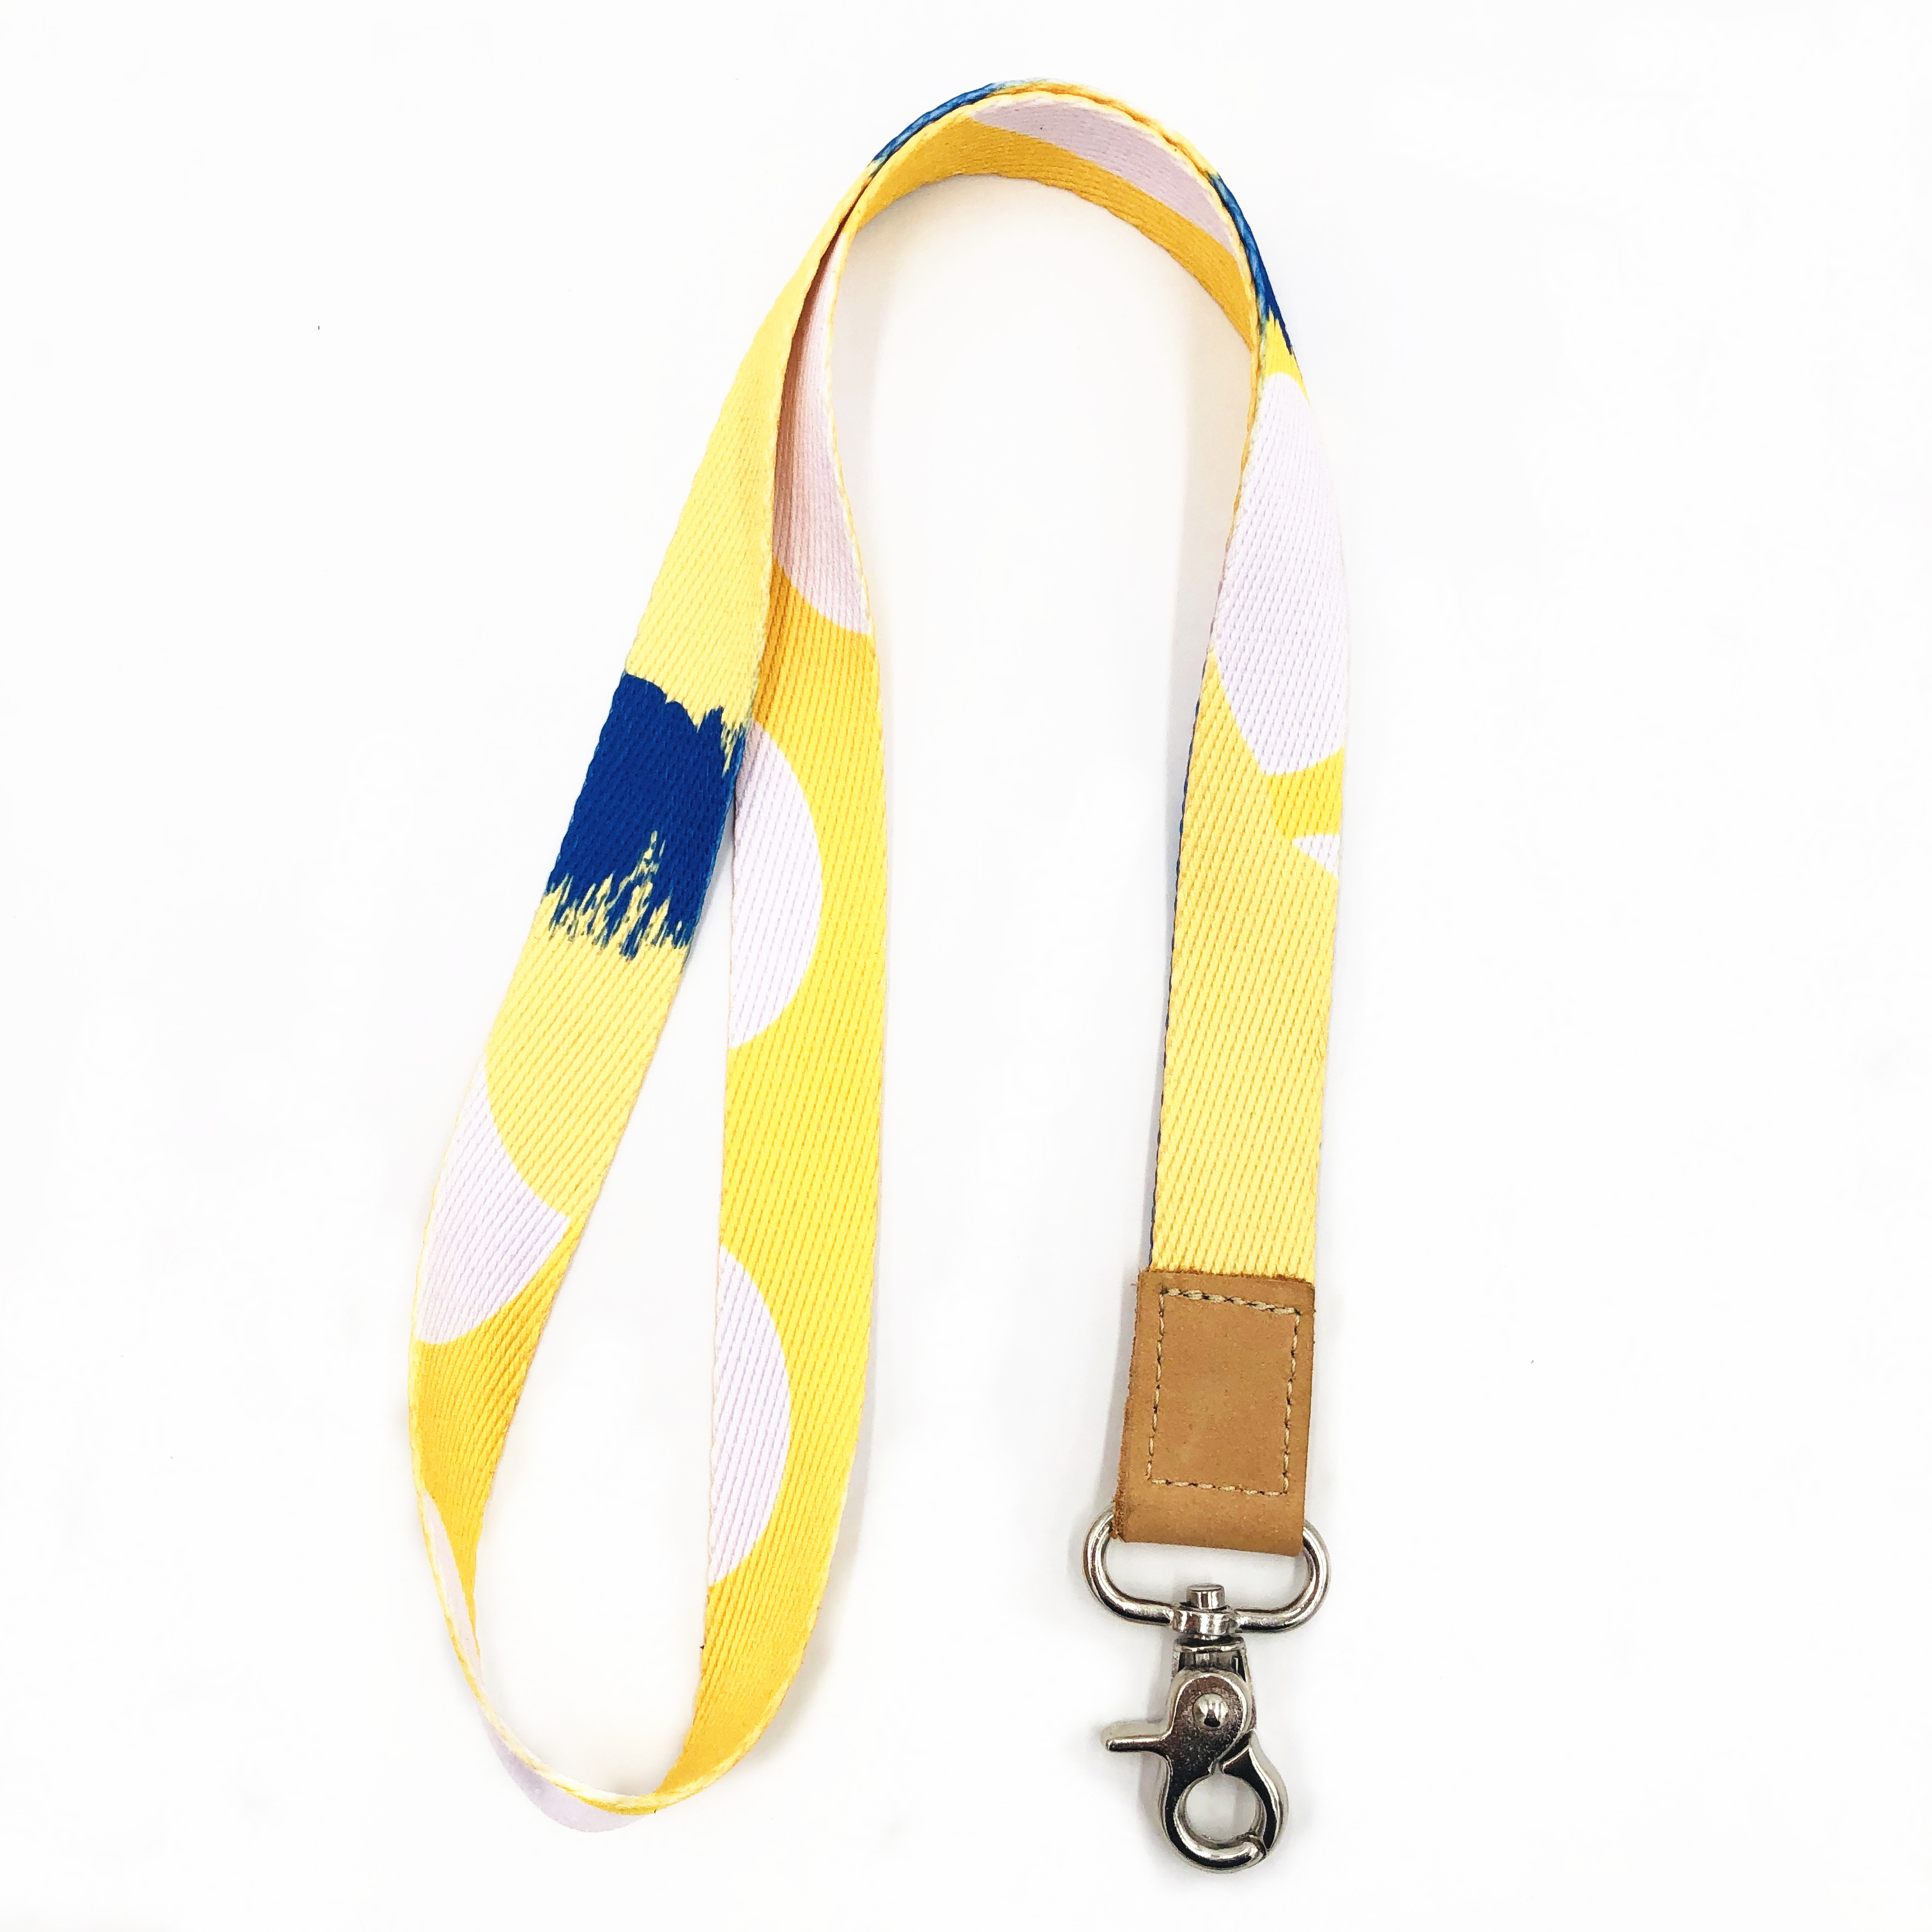 Durable Silky Polyester Strap with Stainless Swivel Hook for Name Tag Badge Lanyard